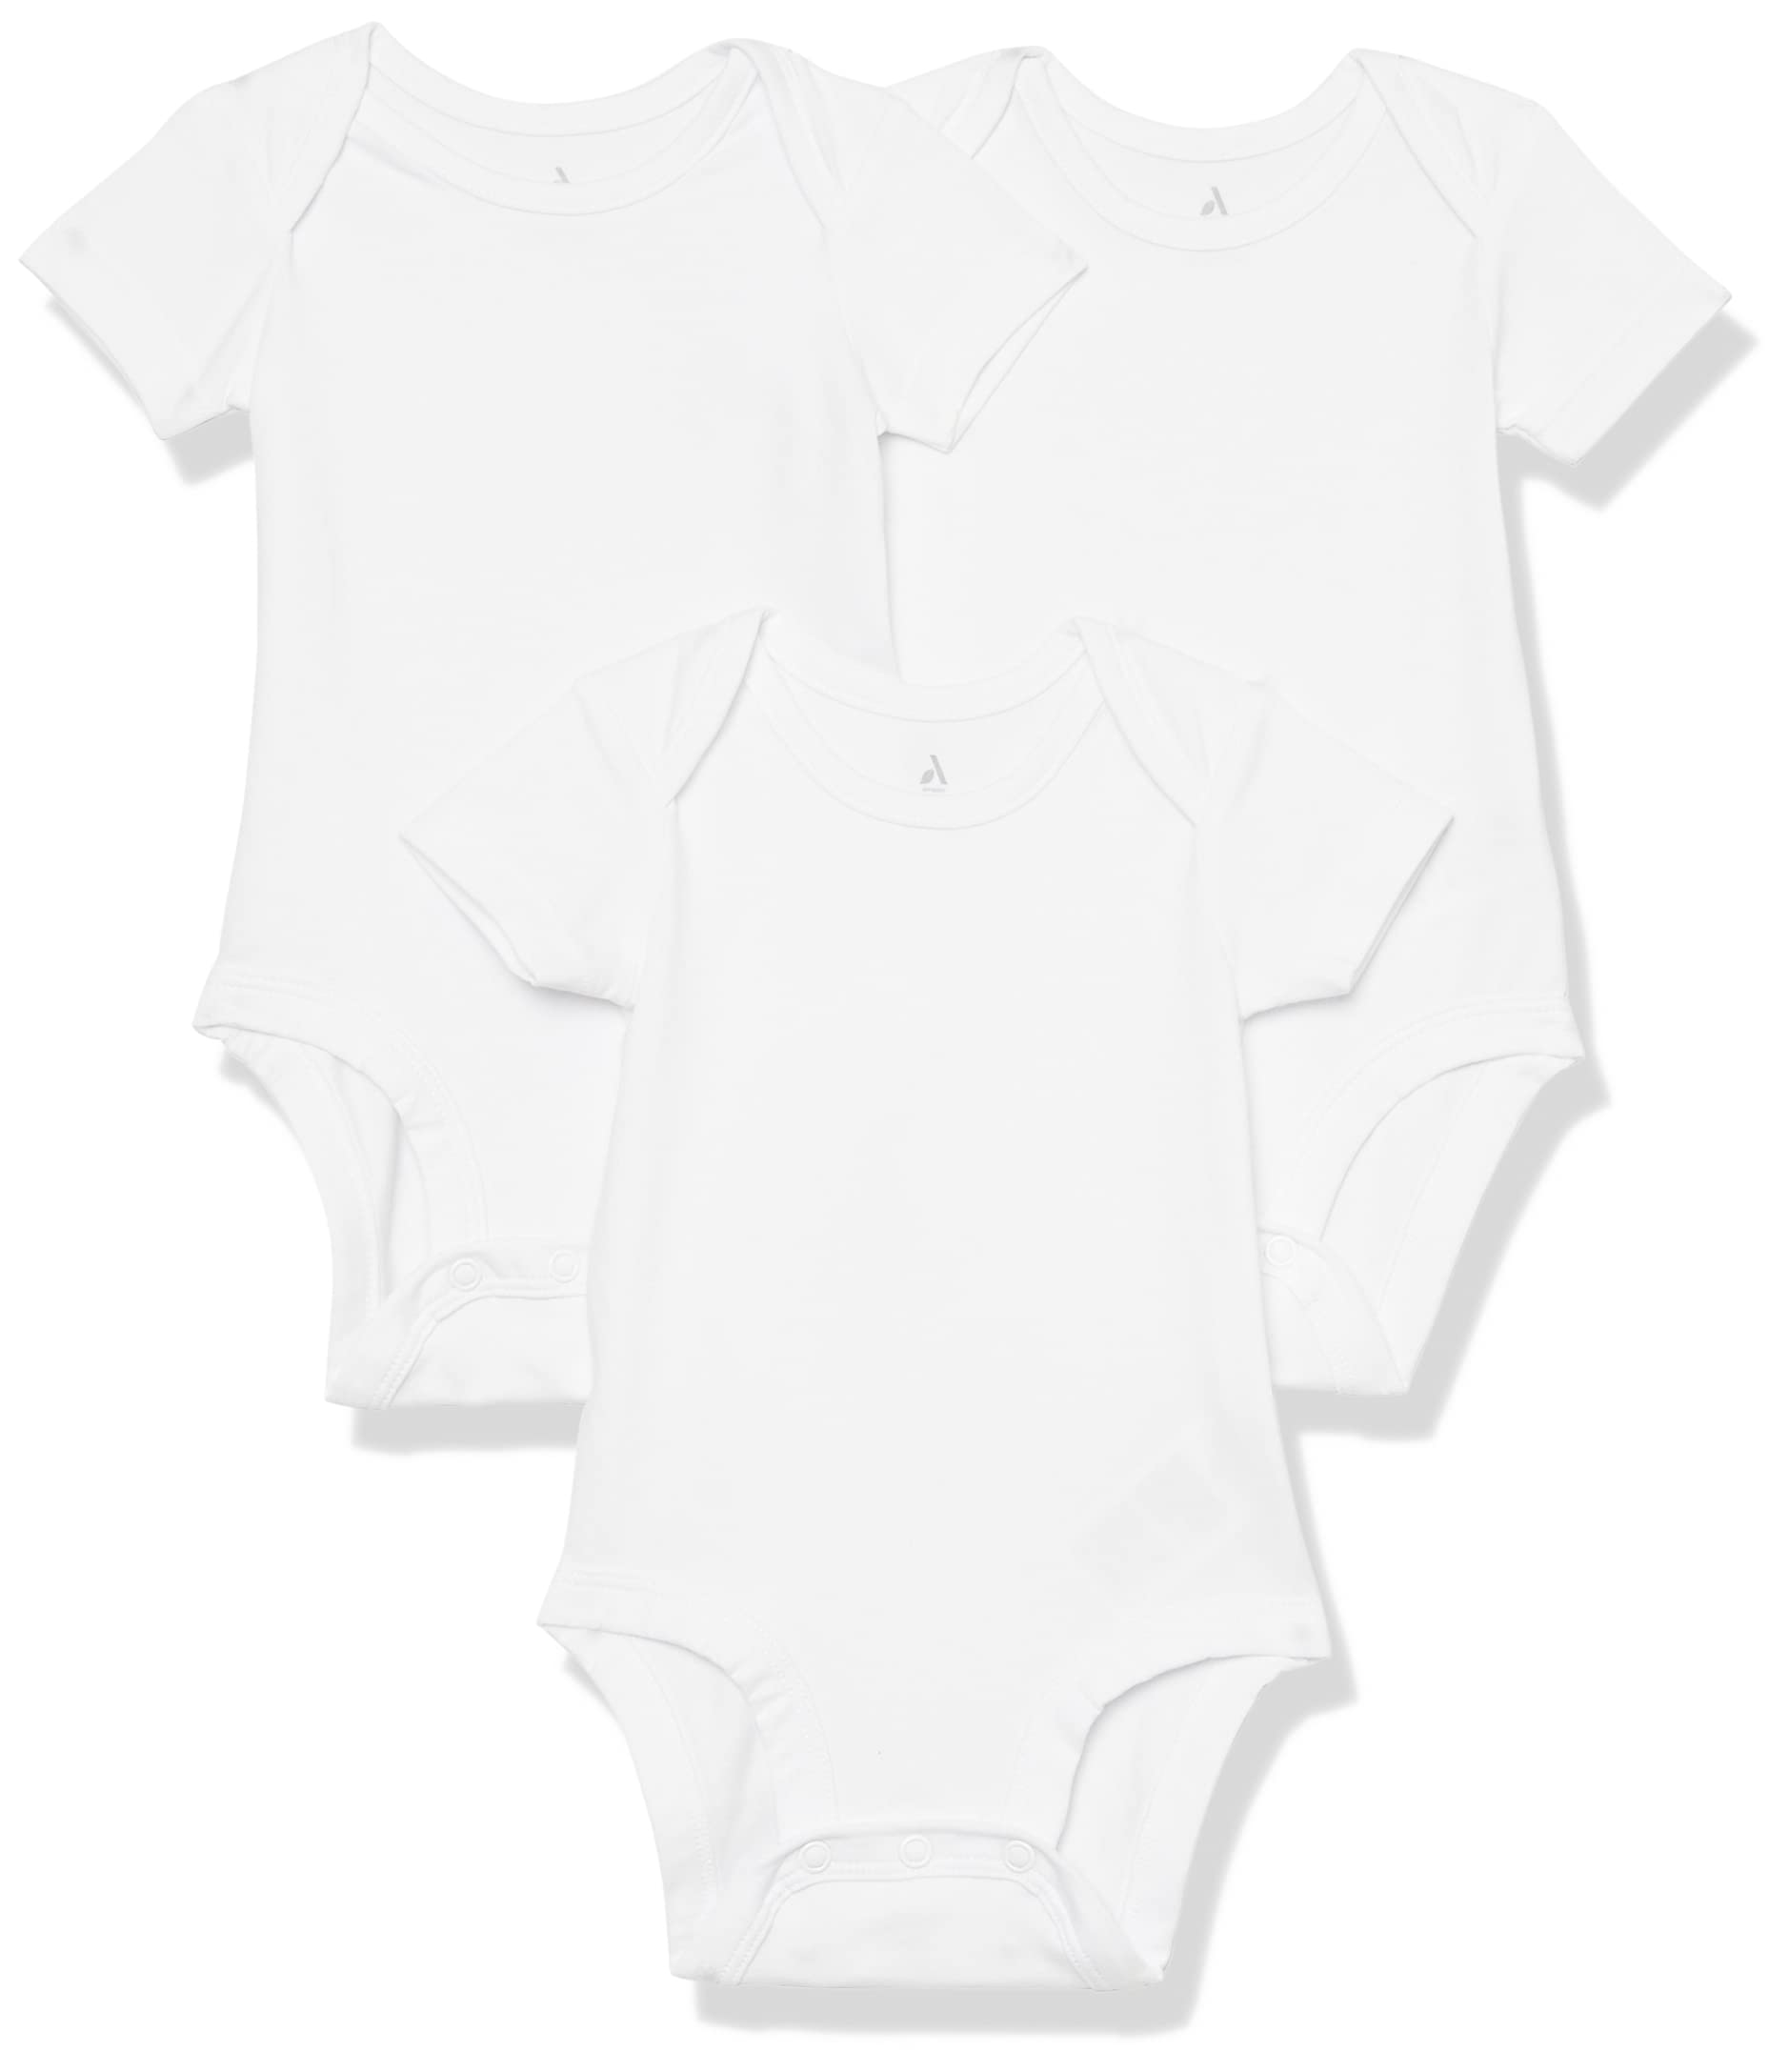 Amazon Essentials Unisex Babies' Cotton Stretch Jersey Short Sleeve Bodysuit (Previously Amazon Aware), Pack of 3